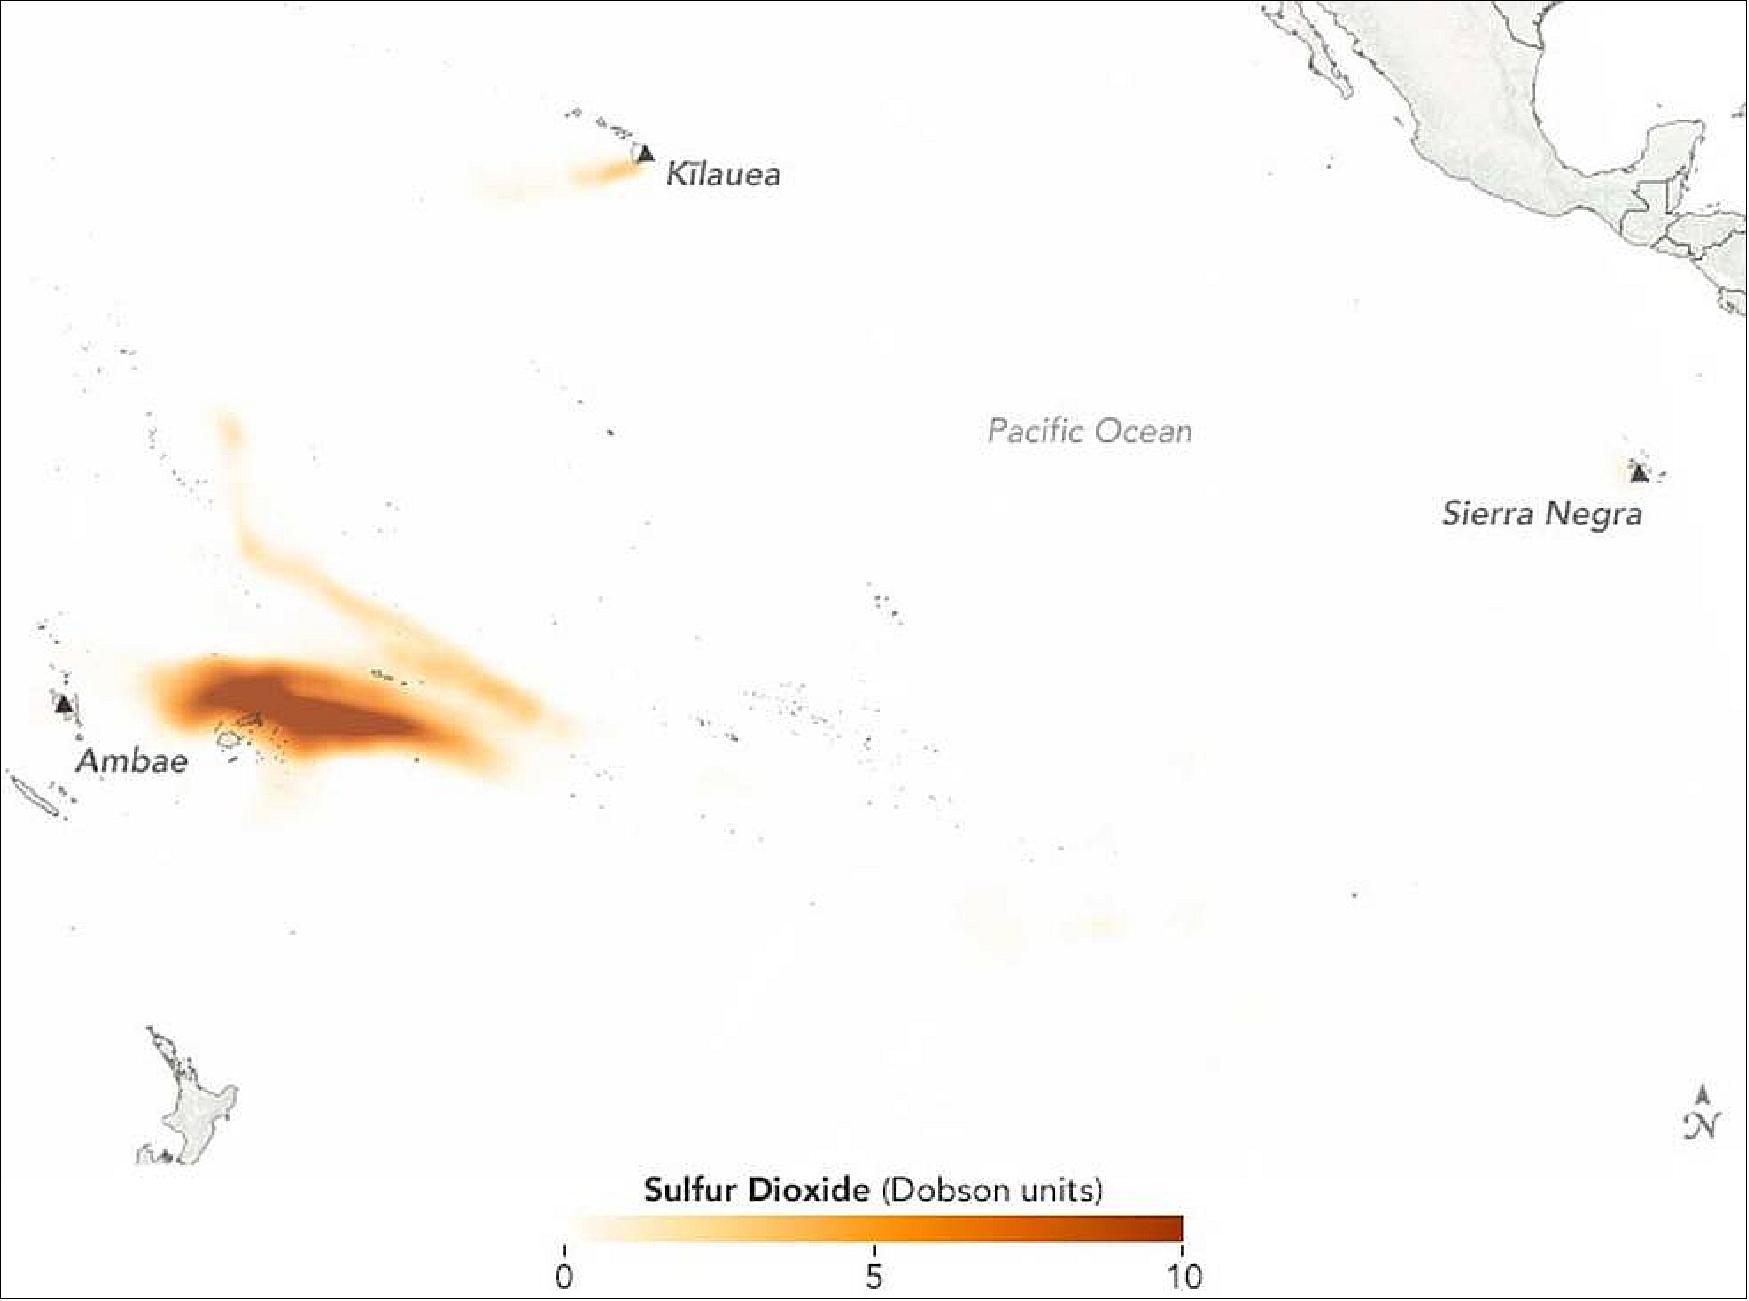 Figure 58: This map shows stratospheric sulfur dioxide concentrations on July 28, 2018, as detected by OMPS on the Suomi-NPP satellite, when Ambae was at the peak of its sulfur emissions. For perspective, emissions from Hawaii’s Kilauea and the Sierra Negra volcano in the Galapagos are shown on the same day (image credit: Image by Lauren Dauphin, NASA Earth Observatory, using OMPS data from GES DISC and Simon Carn)